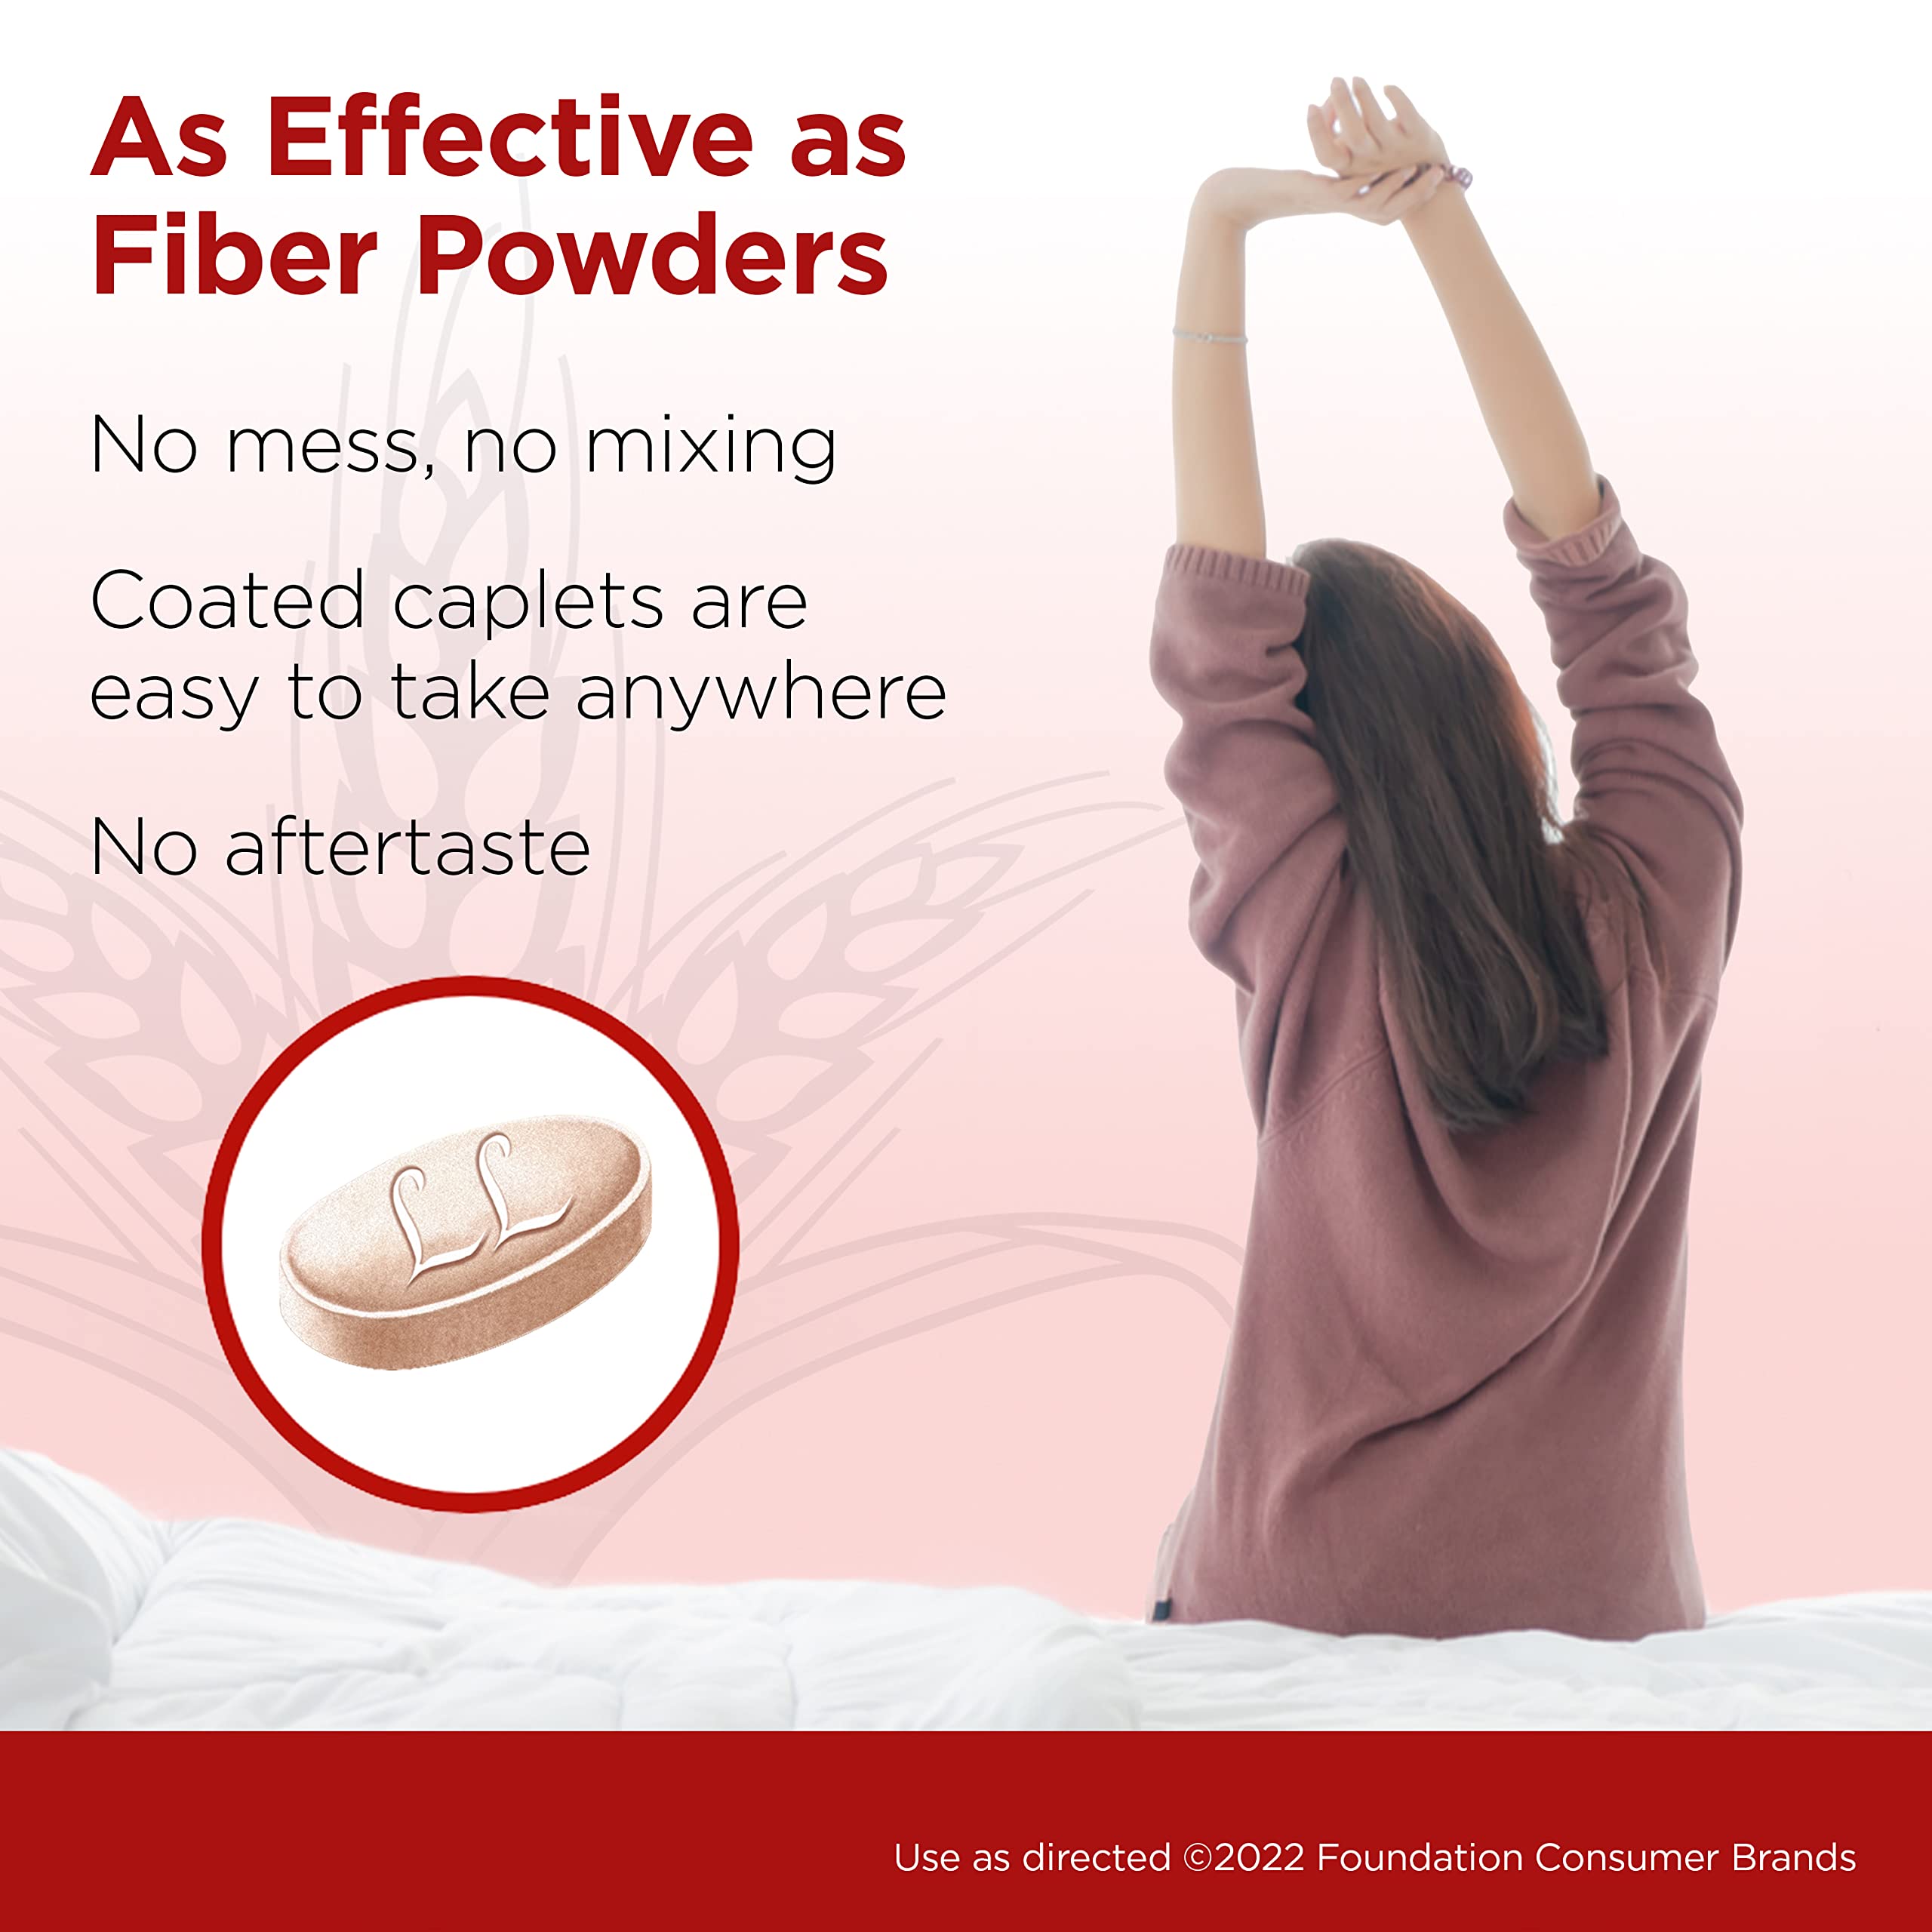 Fibercon Fiber Therapy Coated Caplets, Safe, Simple & Comfortable Insoluble Fiber for Bowel Irregularity, Comfortable Constipation Relief with No Gas or Bloating, 90 Caplets